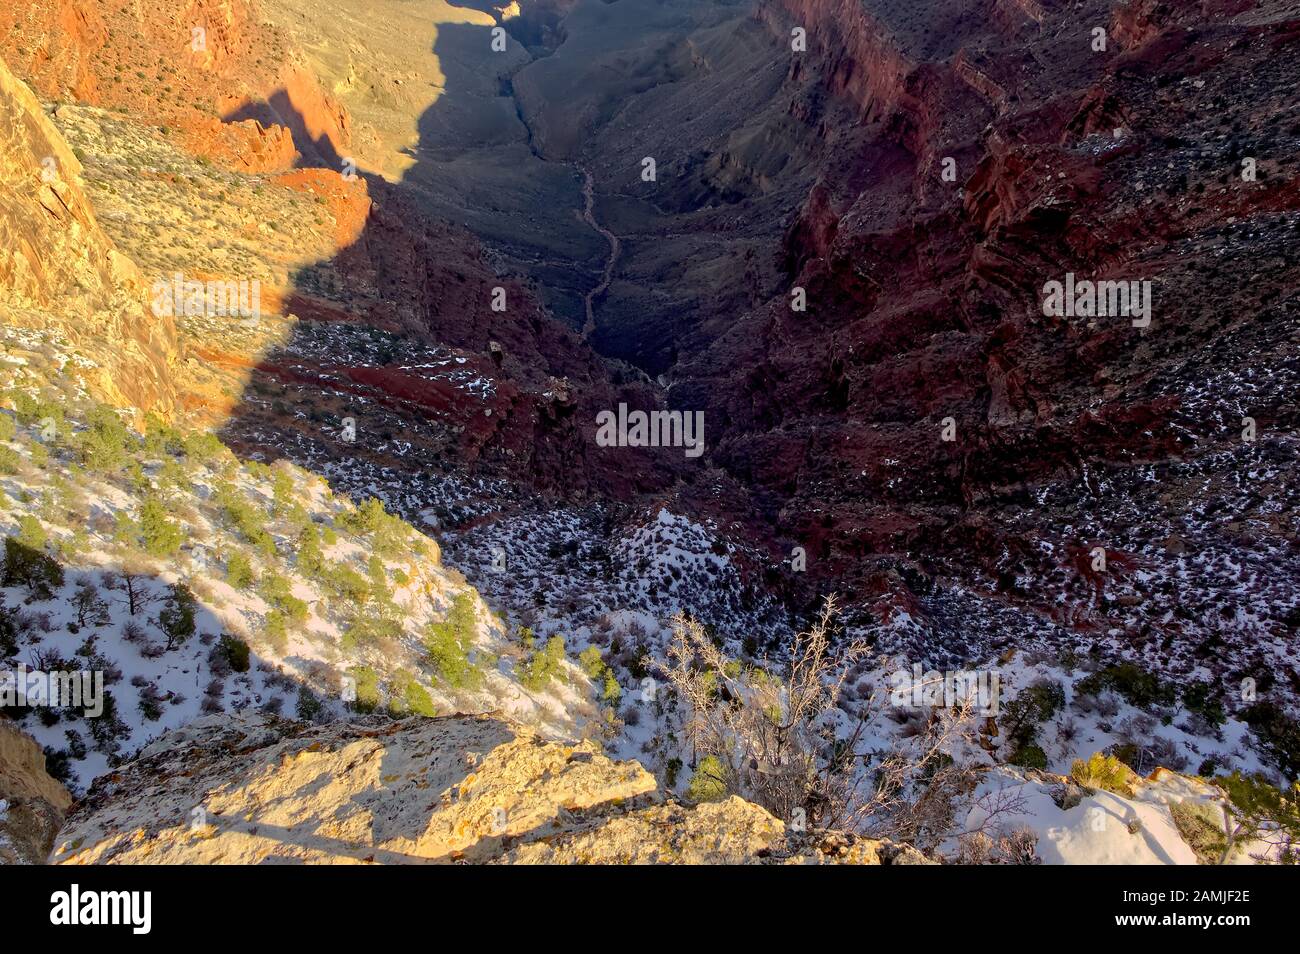 A deep chasm on the south rim of Arizona's Grand Canyon known as the Abyss. Stock Photo